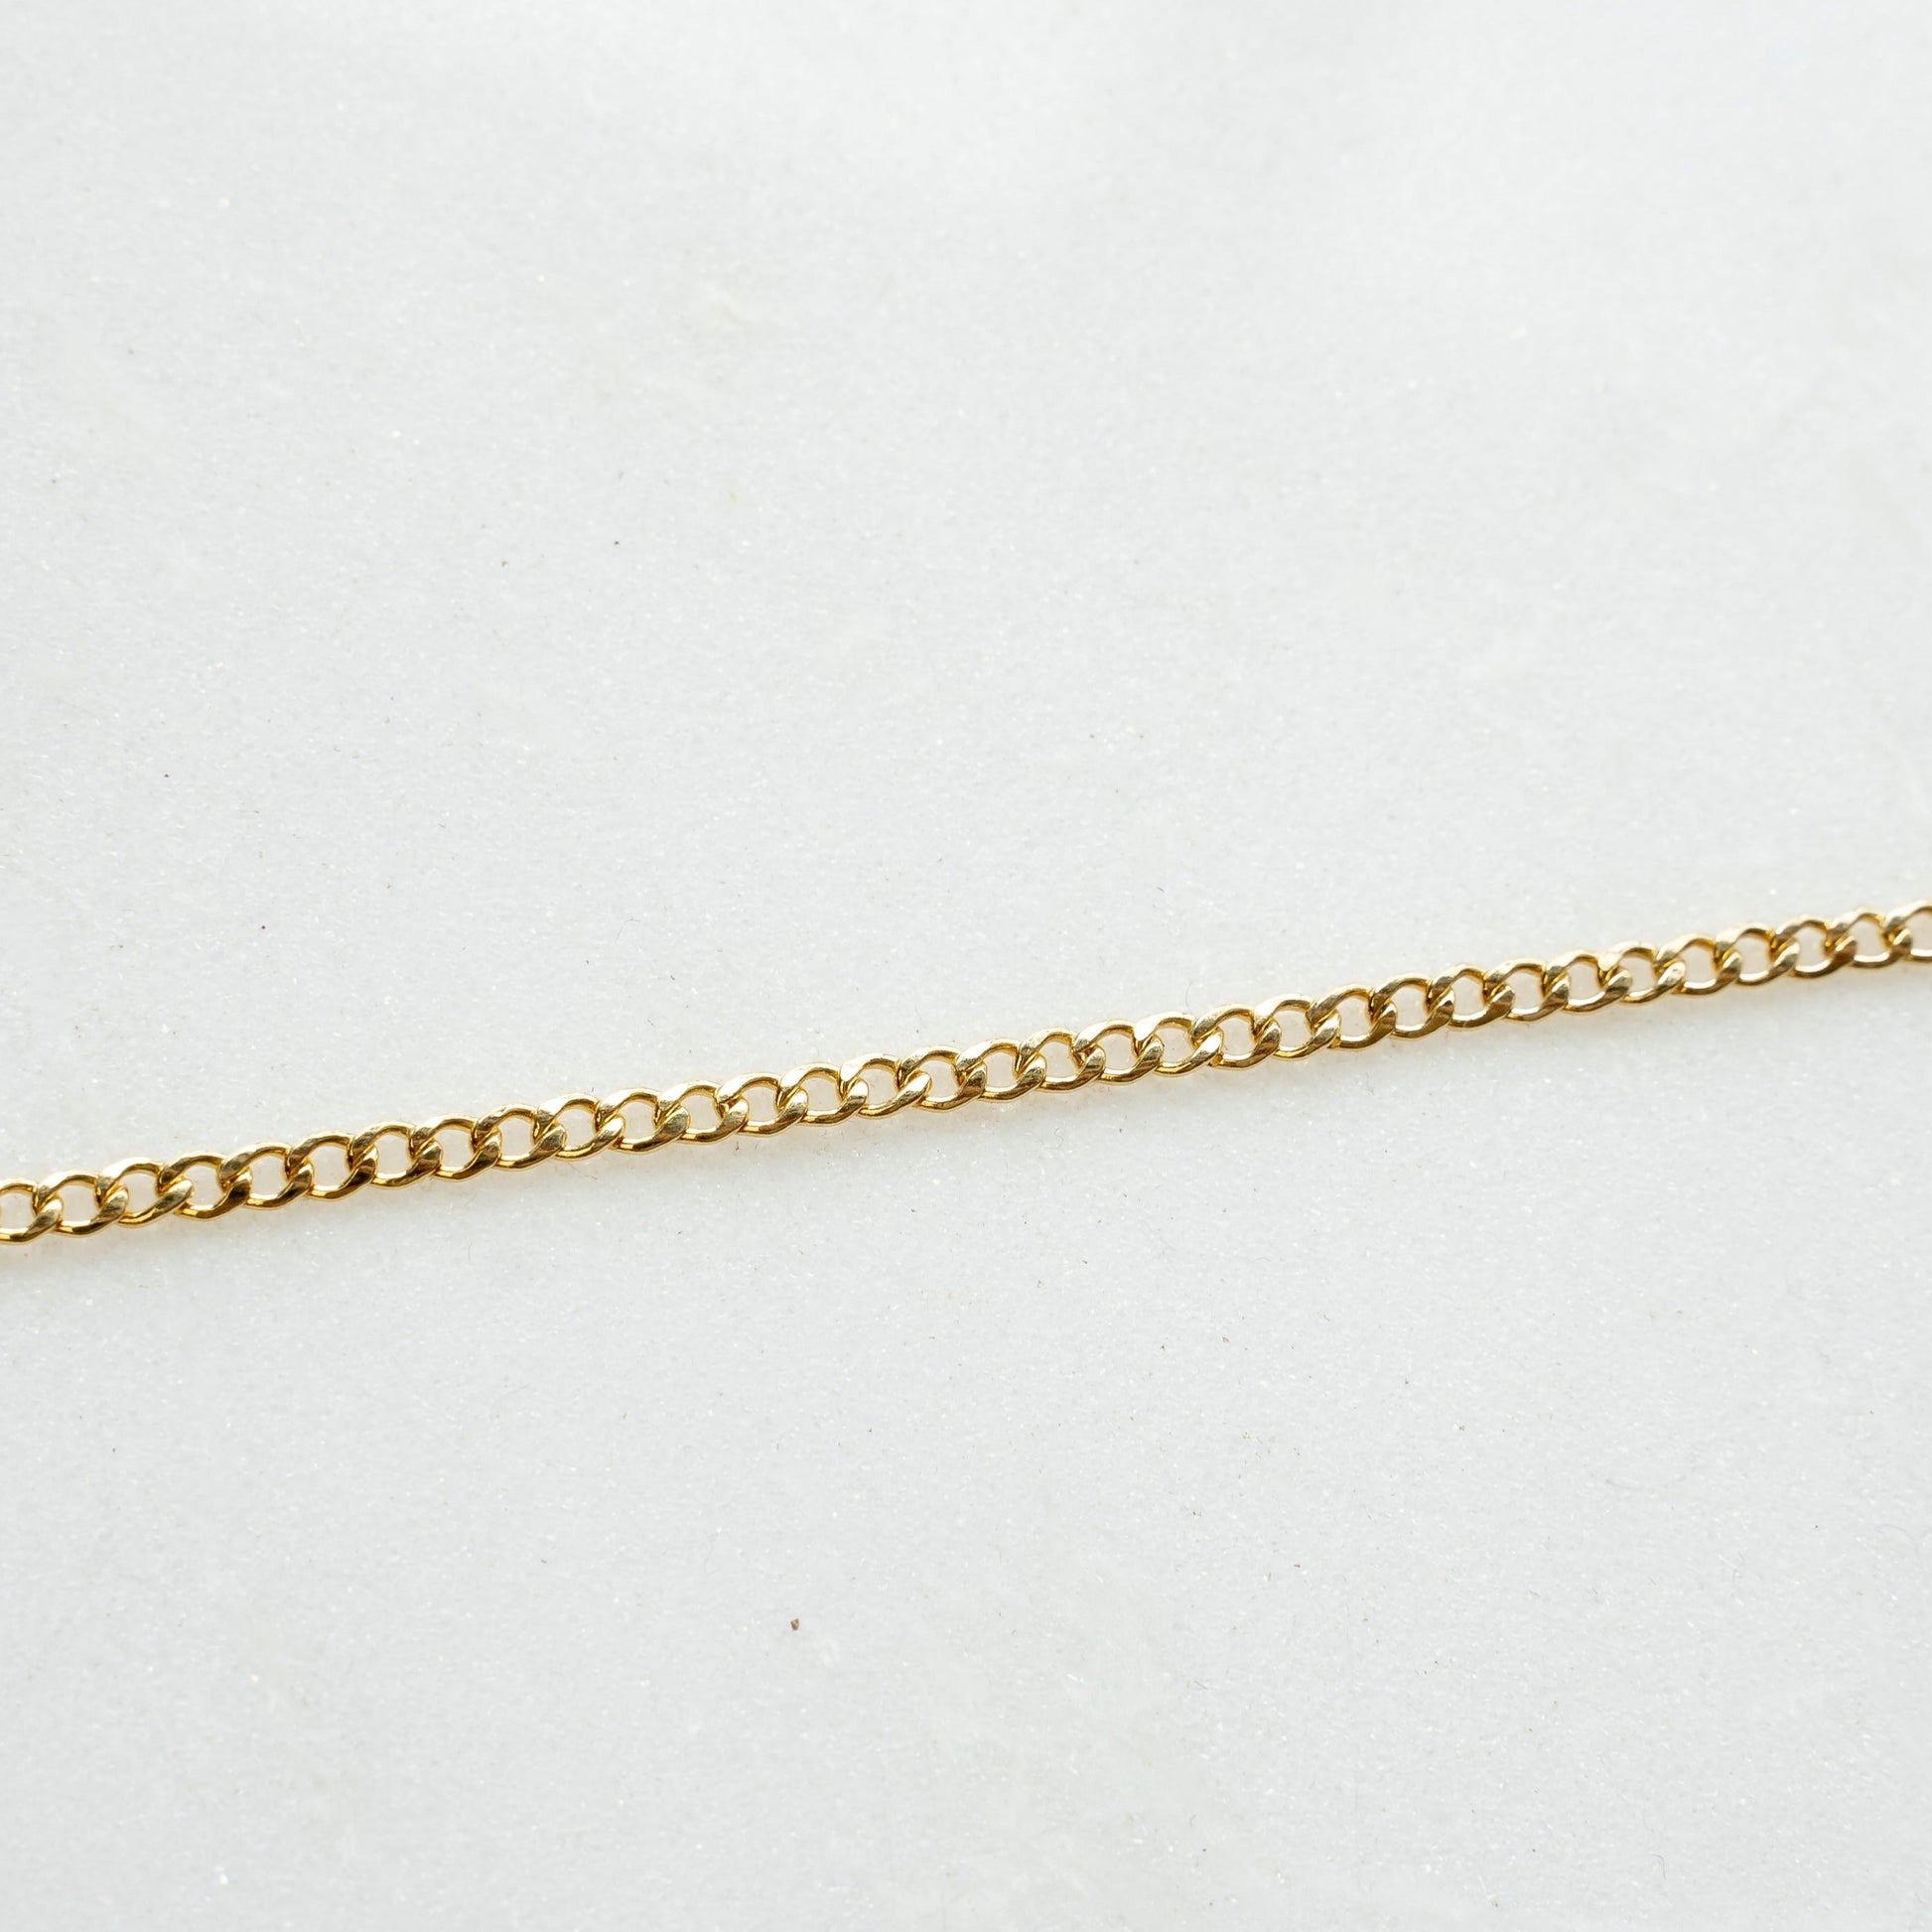 Lovely Links Permanent Jewelry JEWELRY The Sis Kiss Gold Filled 3.3 mm Curb Link Cable Chain 15 Minutes